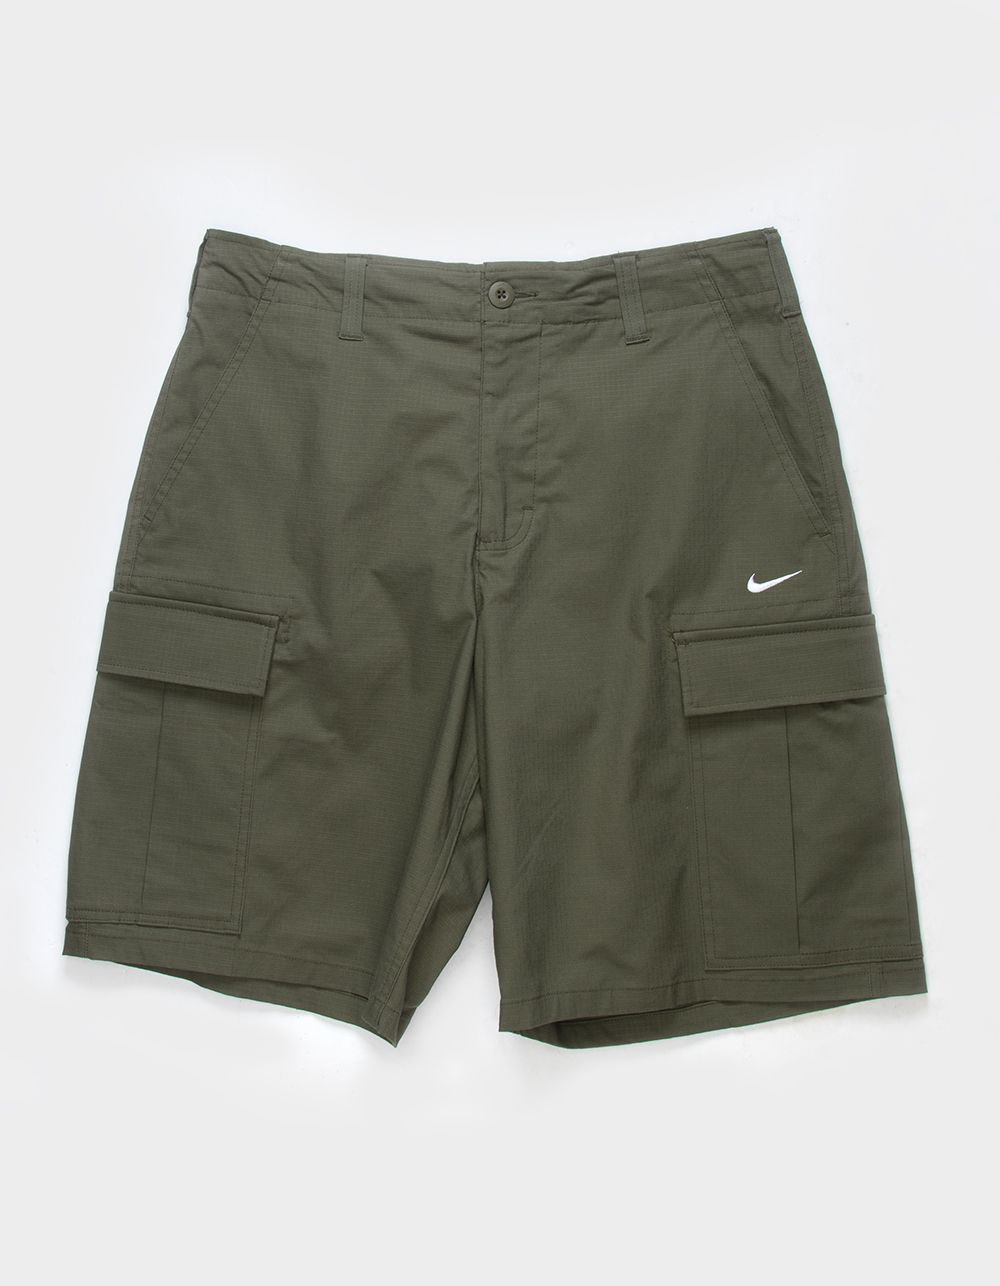 Get for the mens cargo shorts to look
stylish